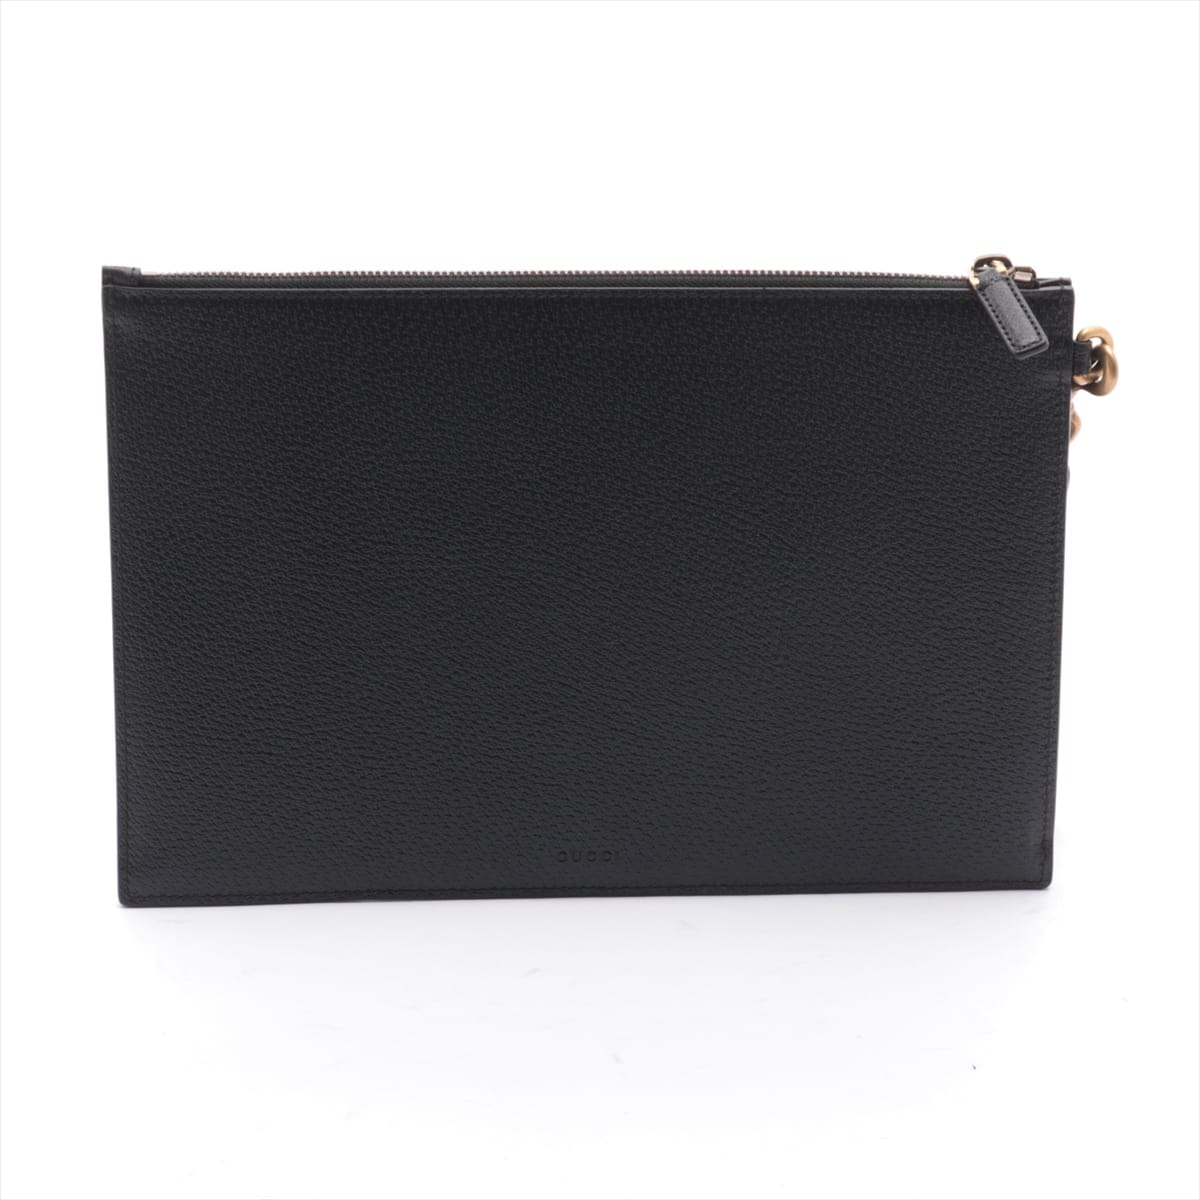 Gucci GG Marmont Leather Clutch bag Black 475317